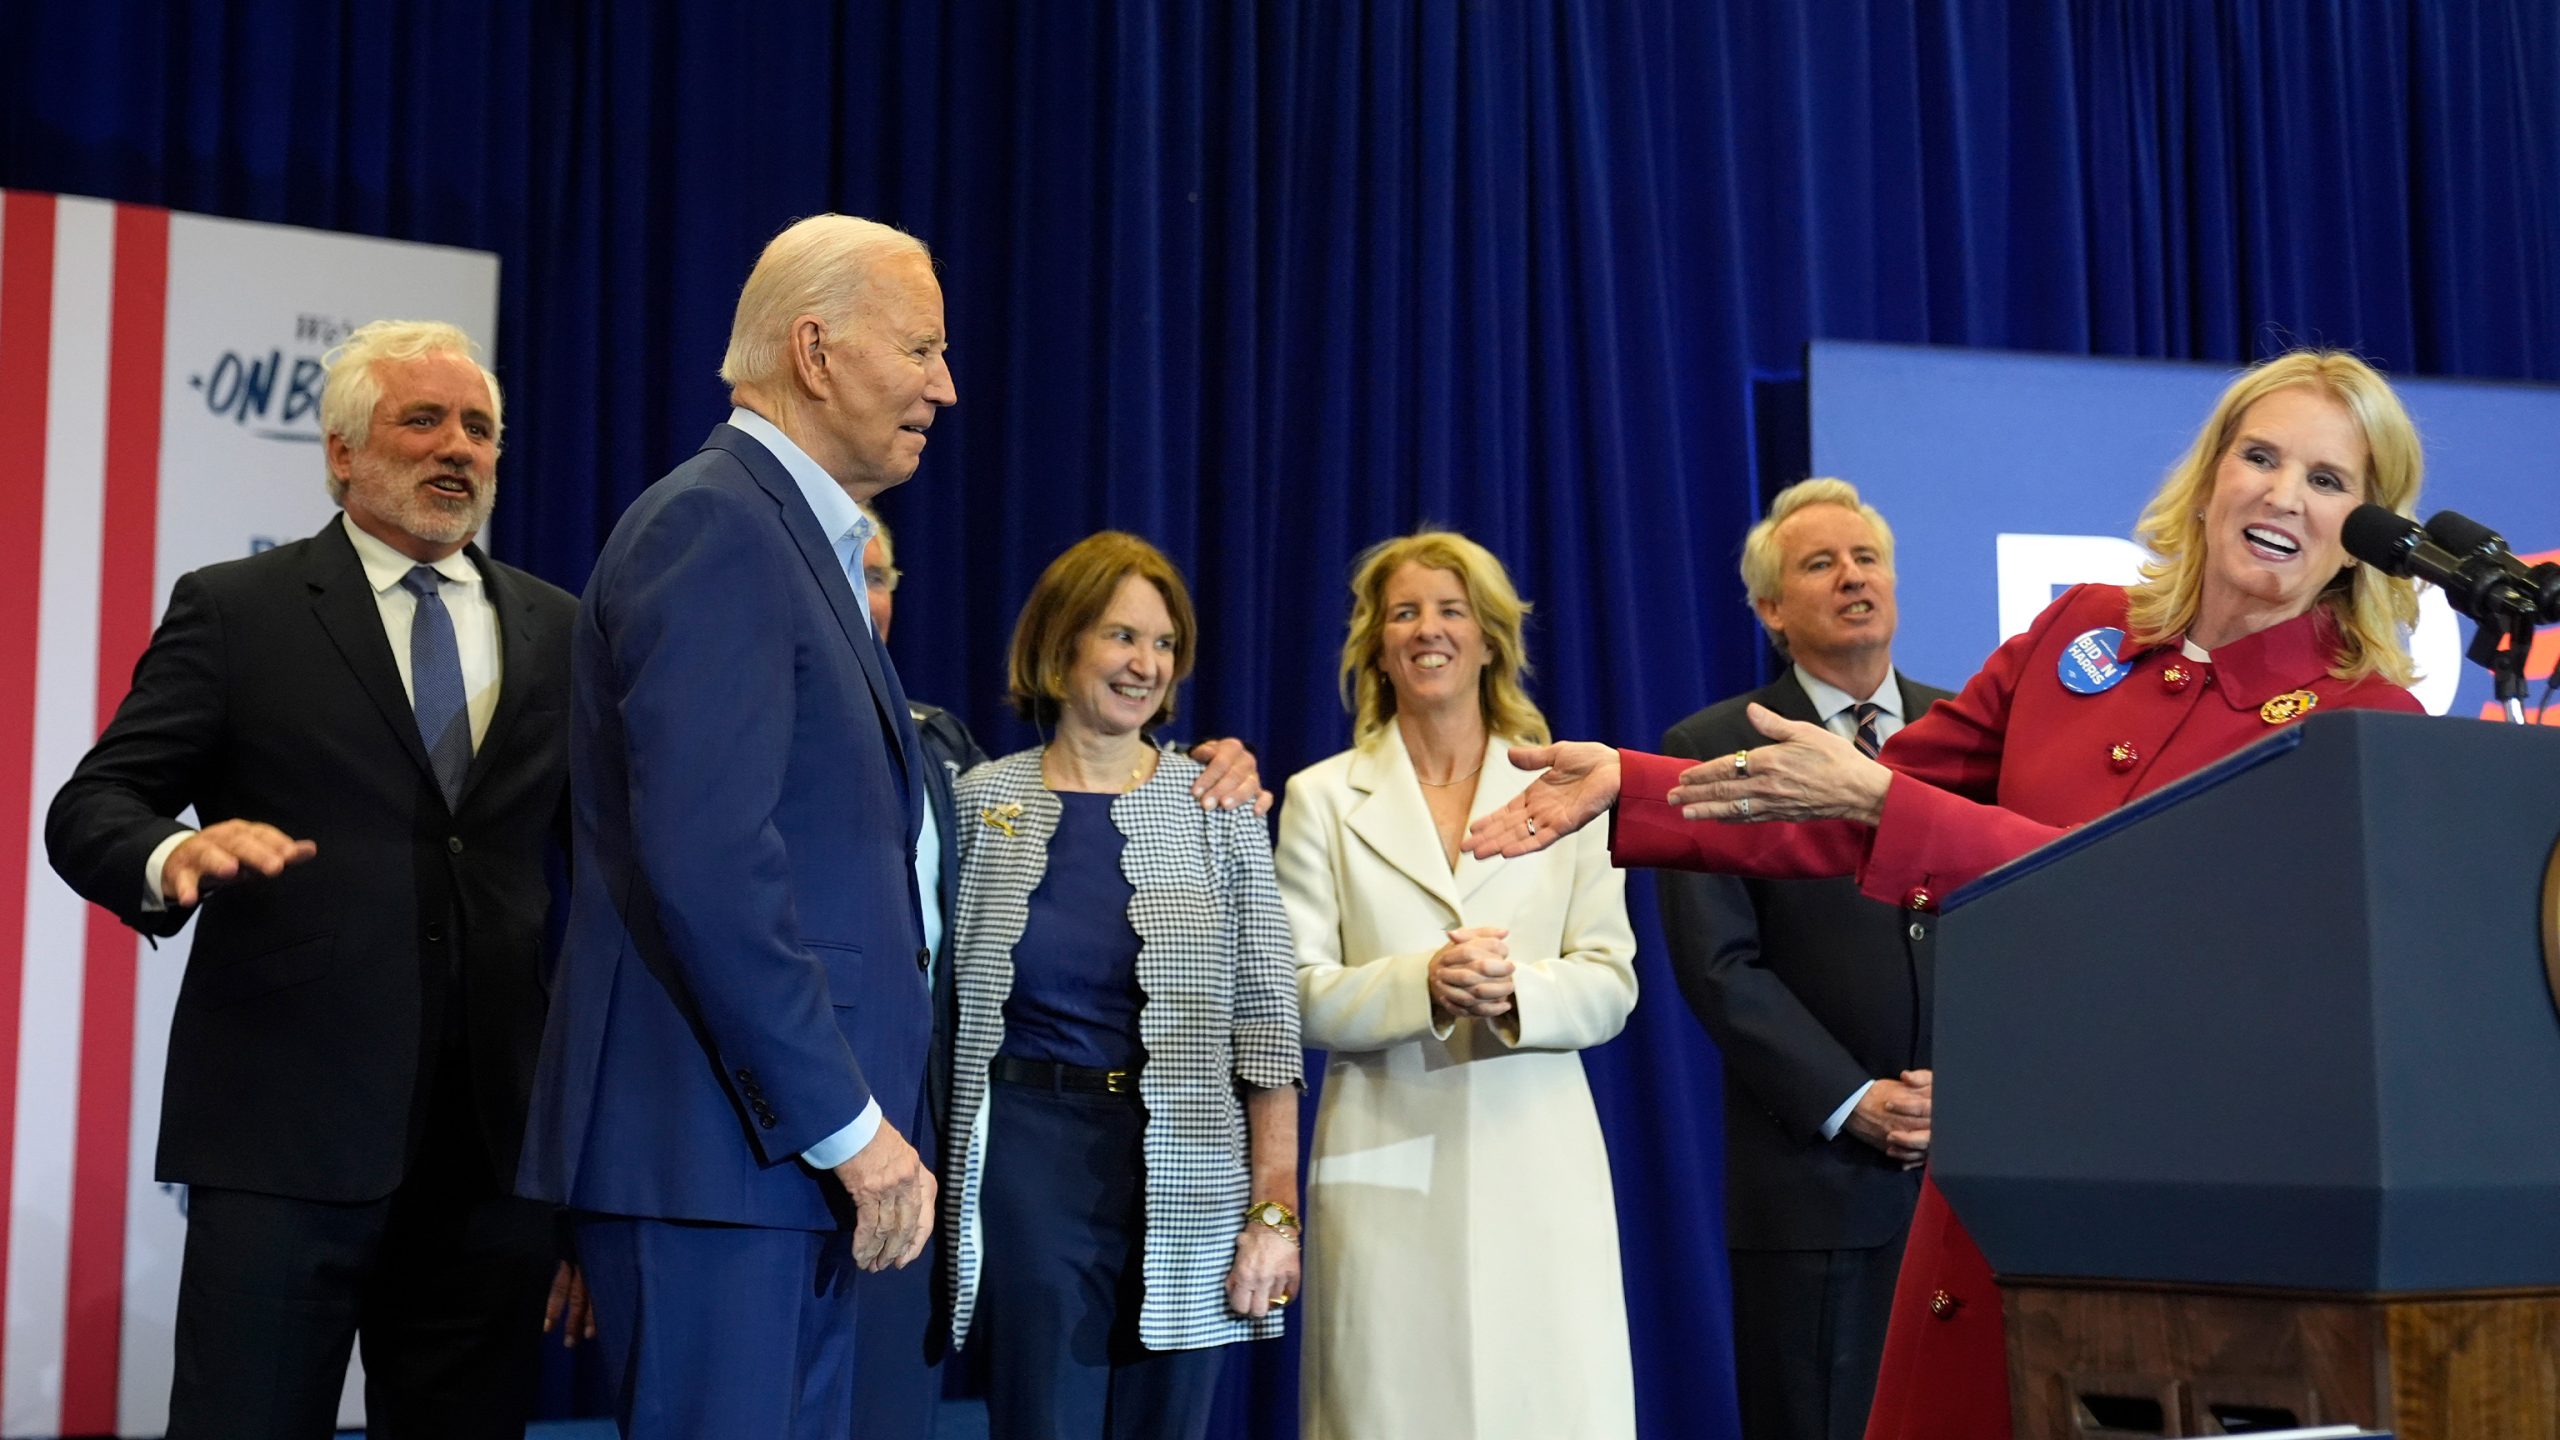 Biden reflects on Kennedy legacy, citing it as inspiration in politics (Credits: AP Photo)